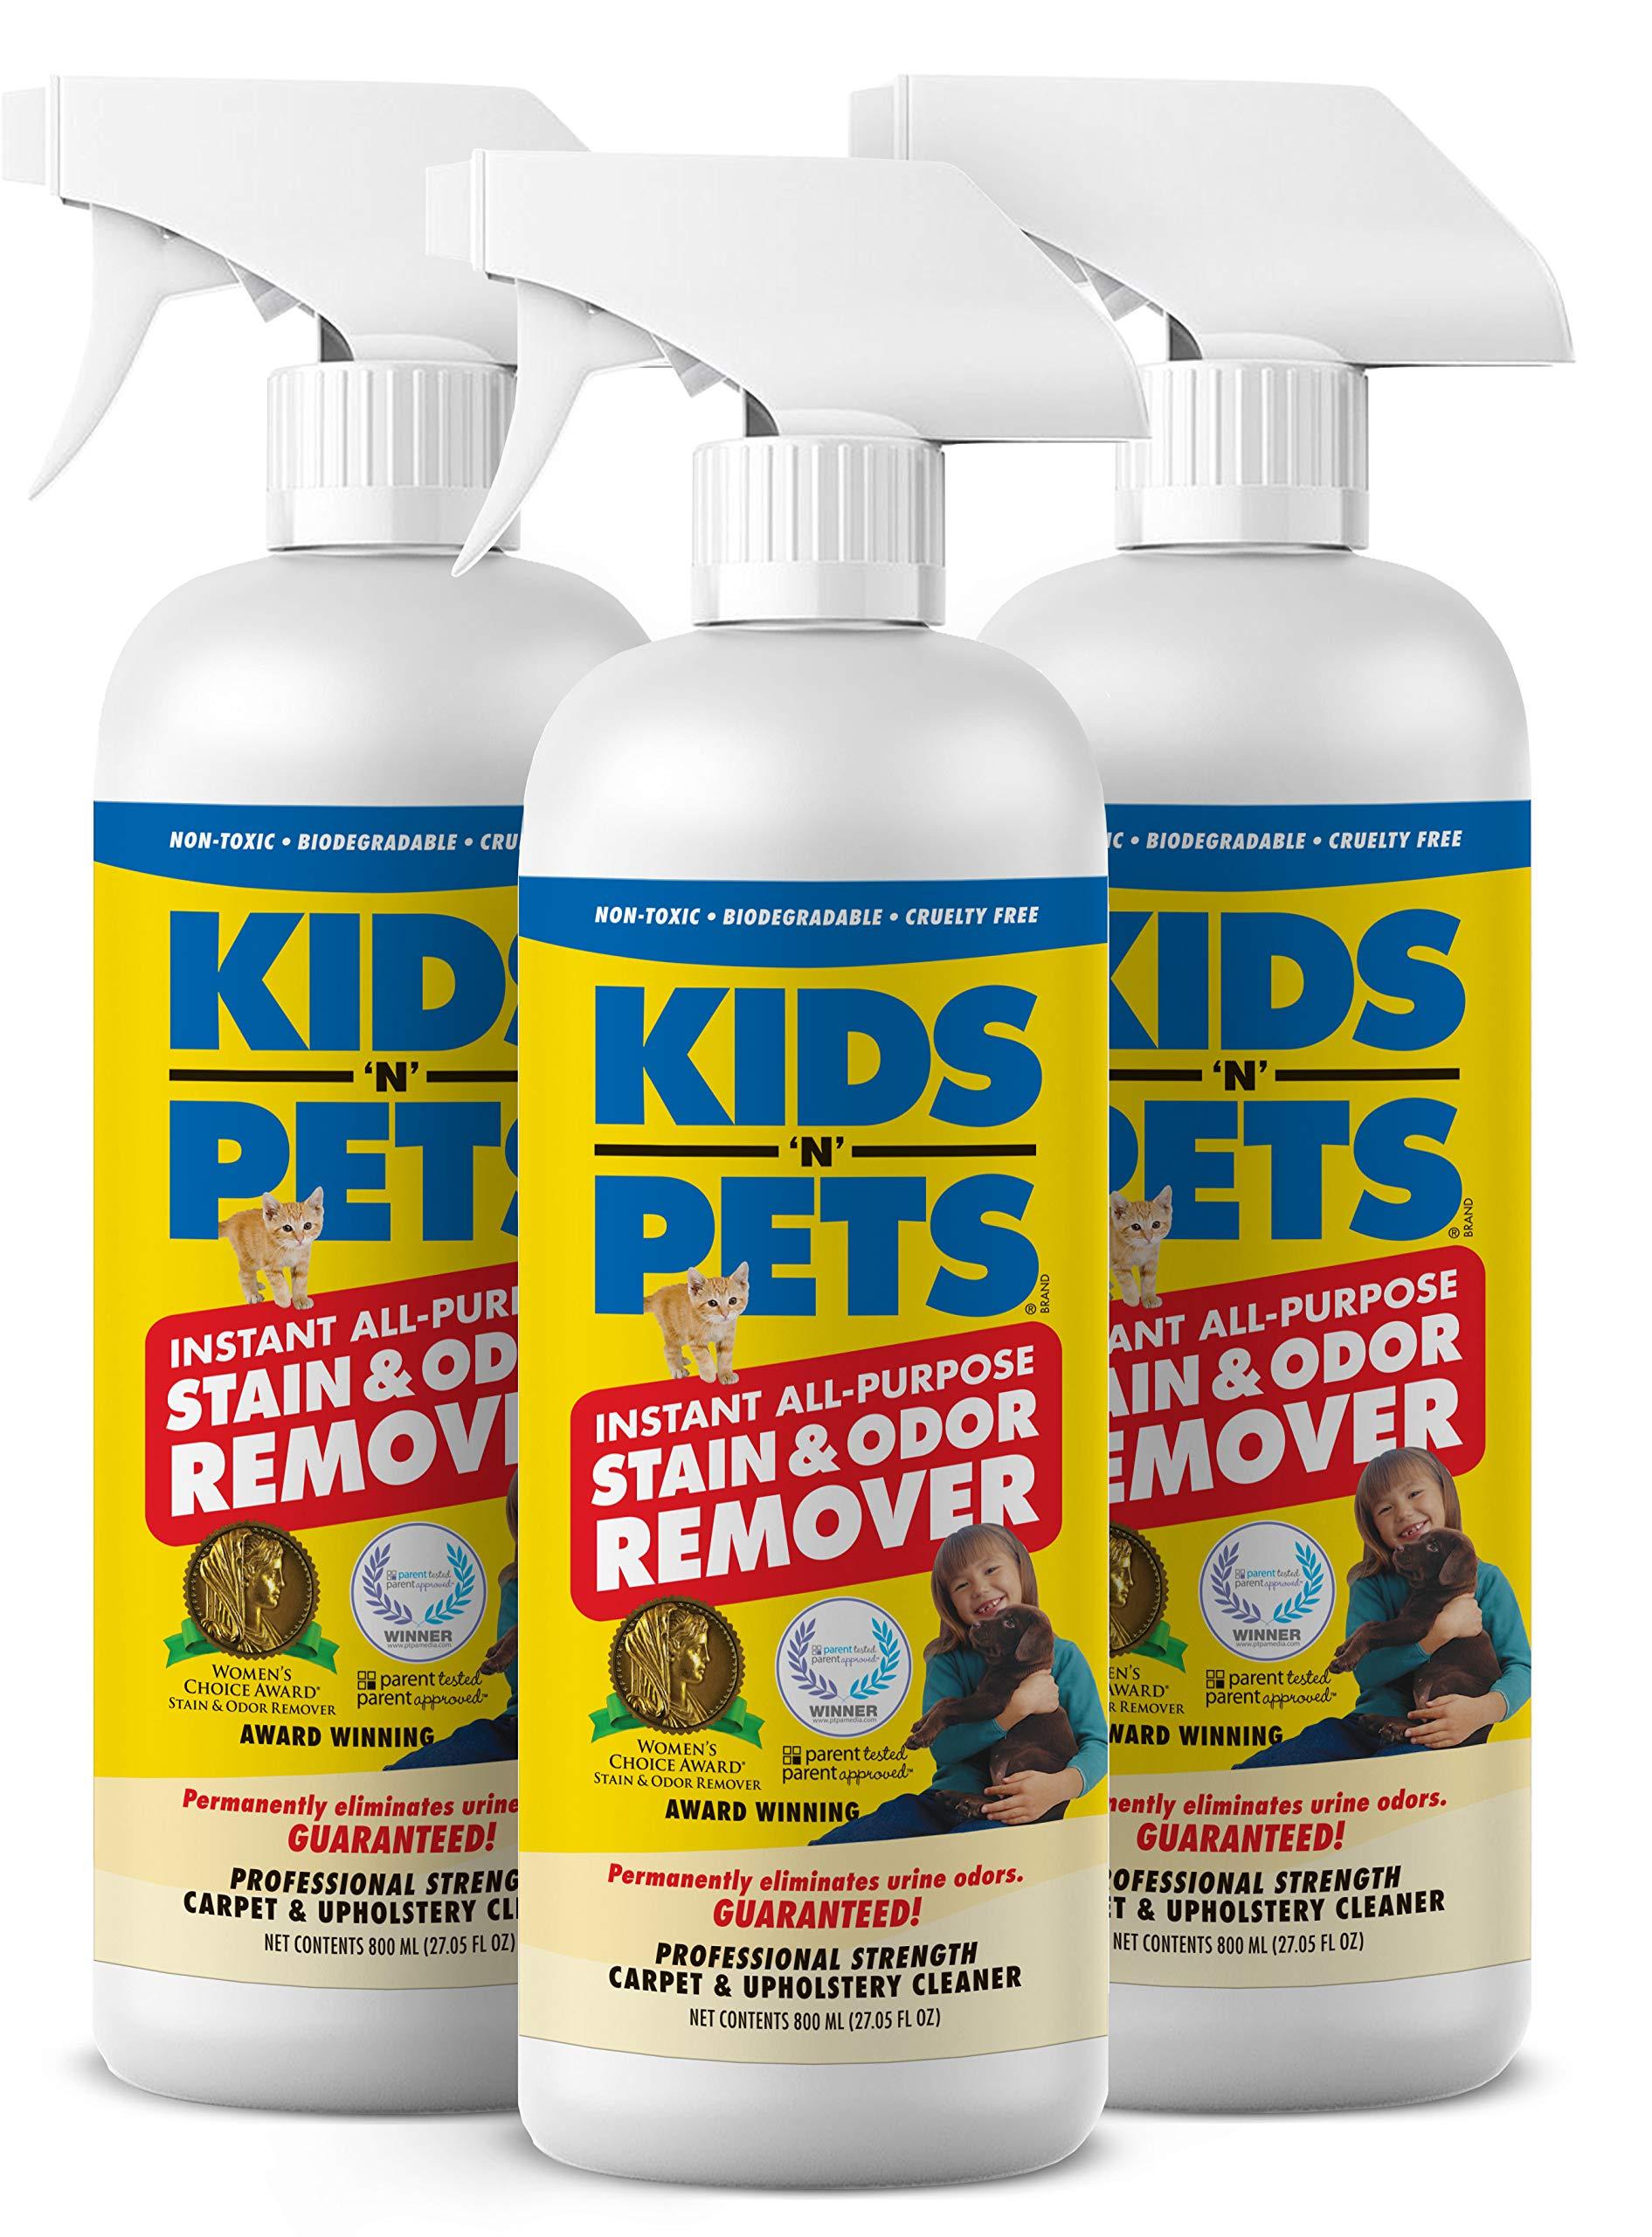 KIDS N PETS - Instant All-Purpose Stain & Odor Remover - Pack of 3-27.05 oz (800 ml) - Proprietary Formula Permanently Eliminates Tough Stains & Odors - Even Urine Odors - Non-Toxic & child Safe